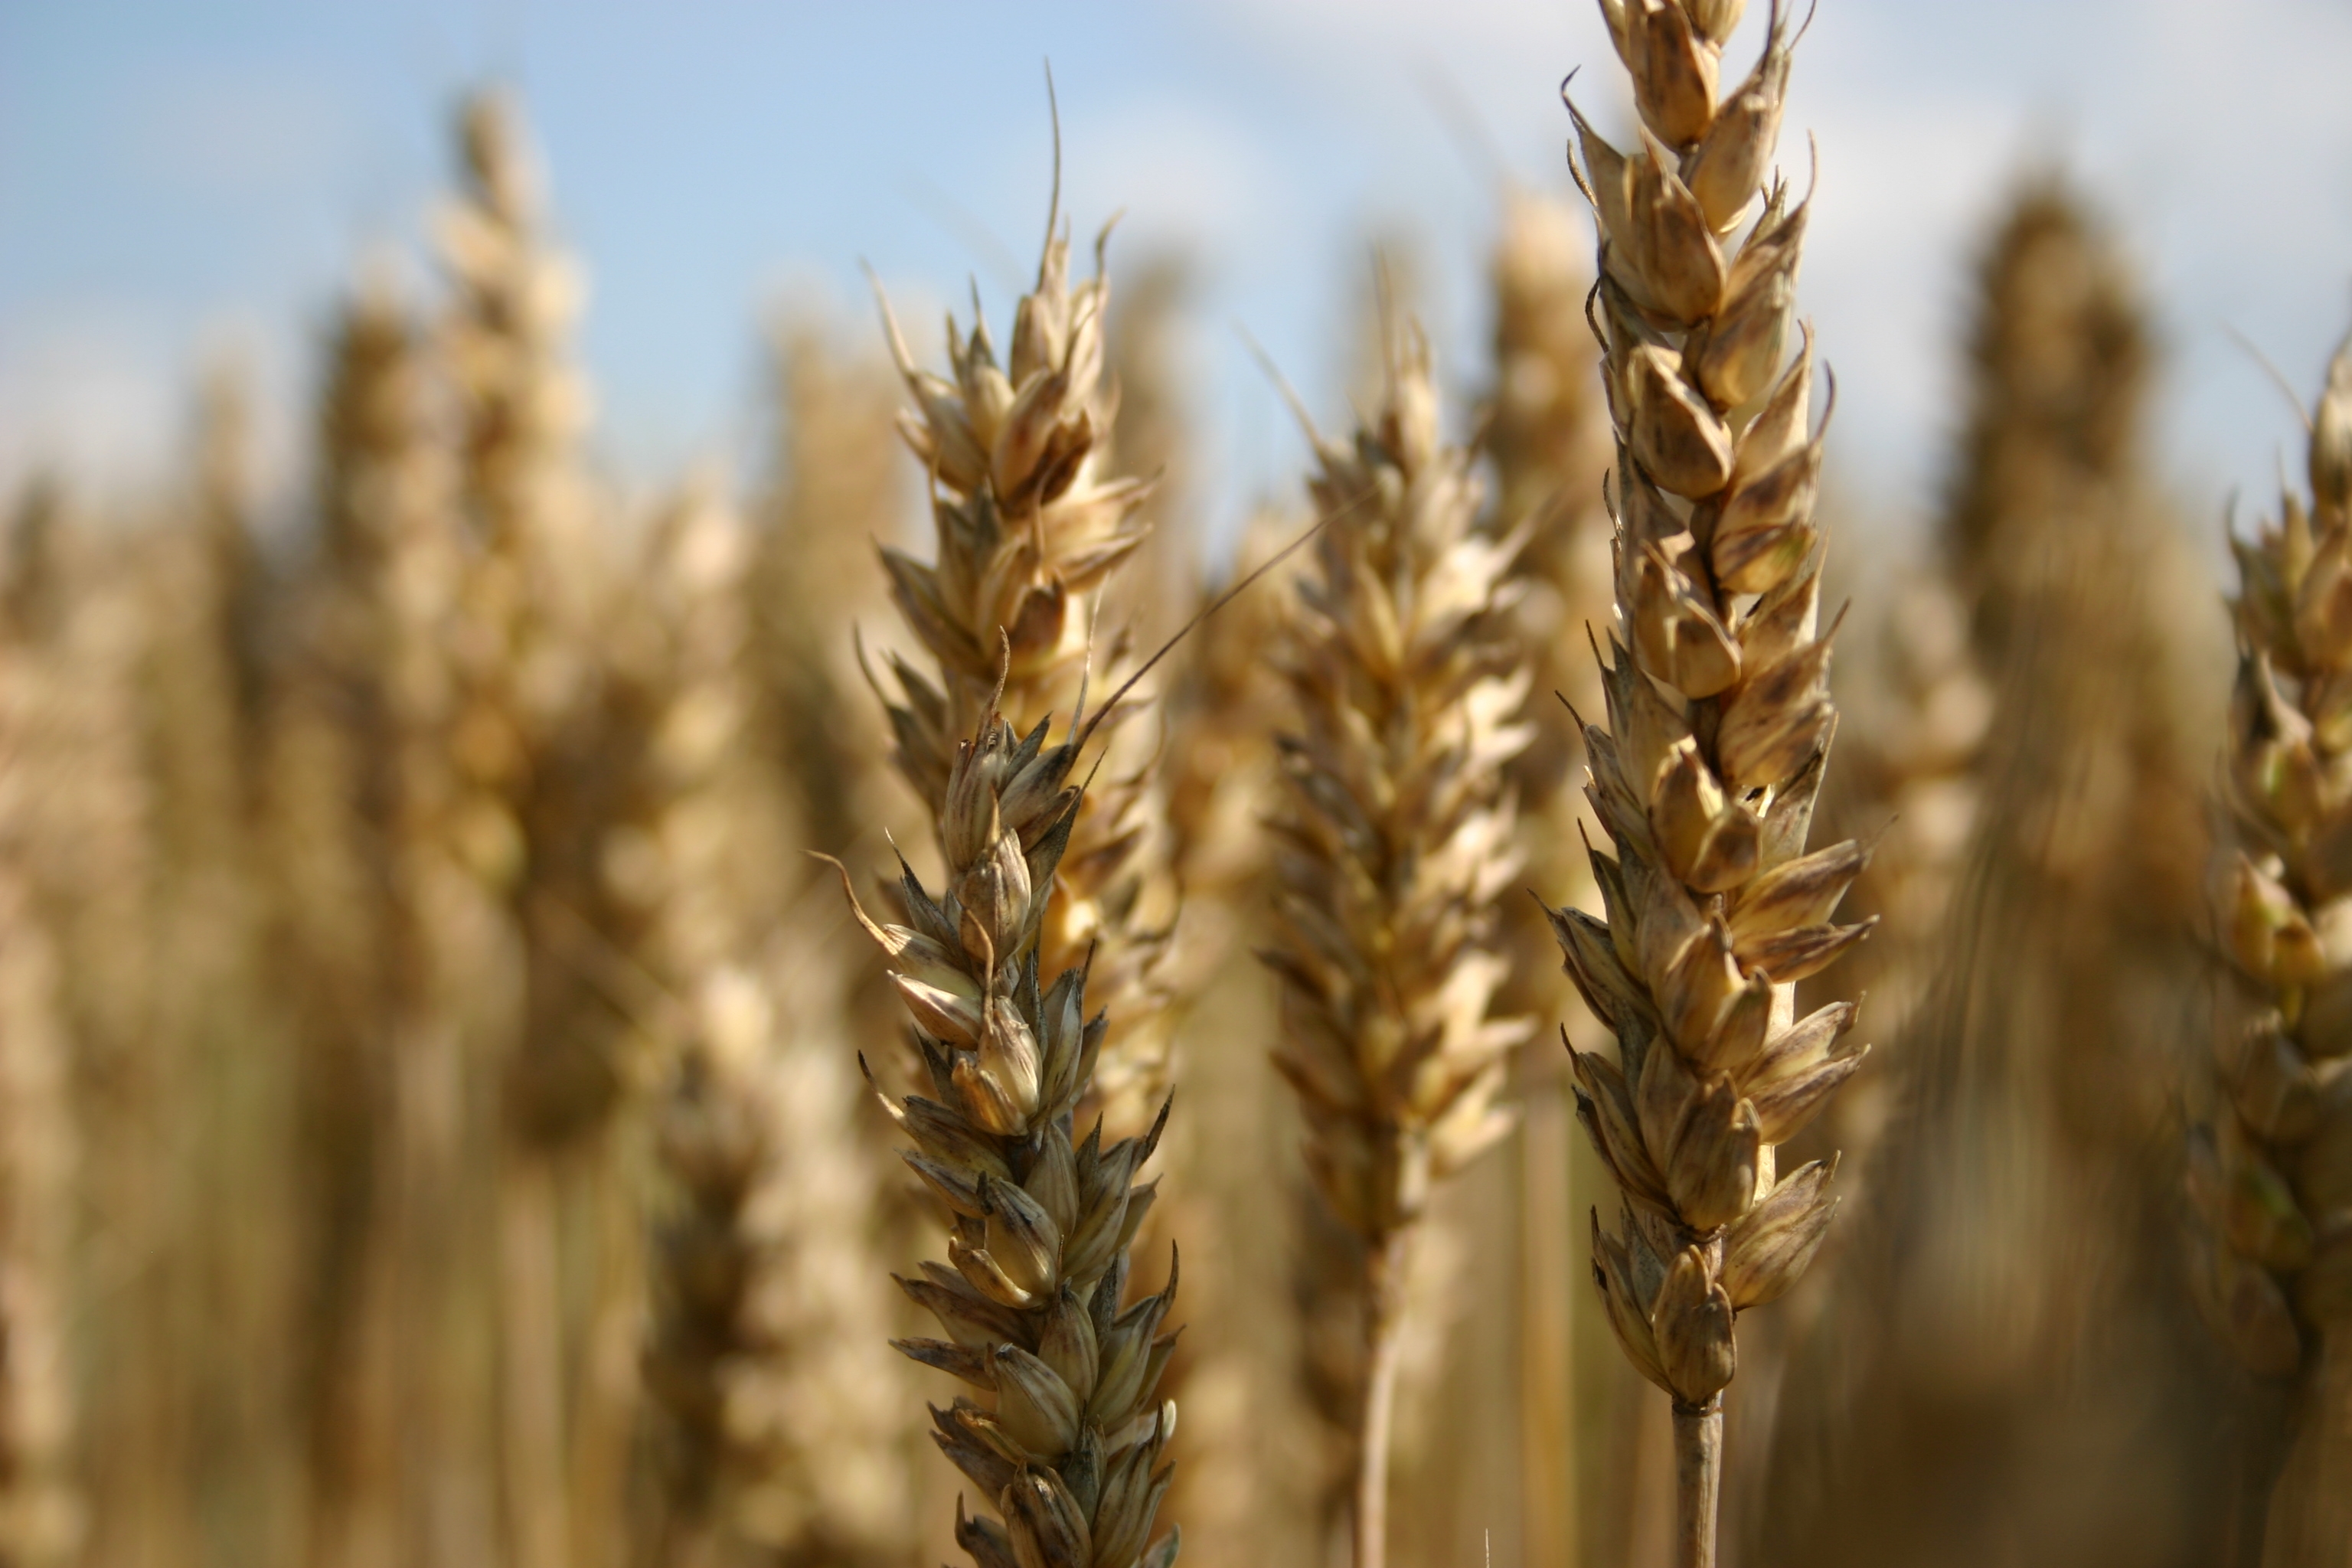 Danish wheat must be made resilient more